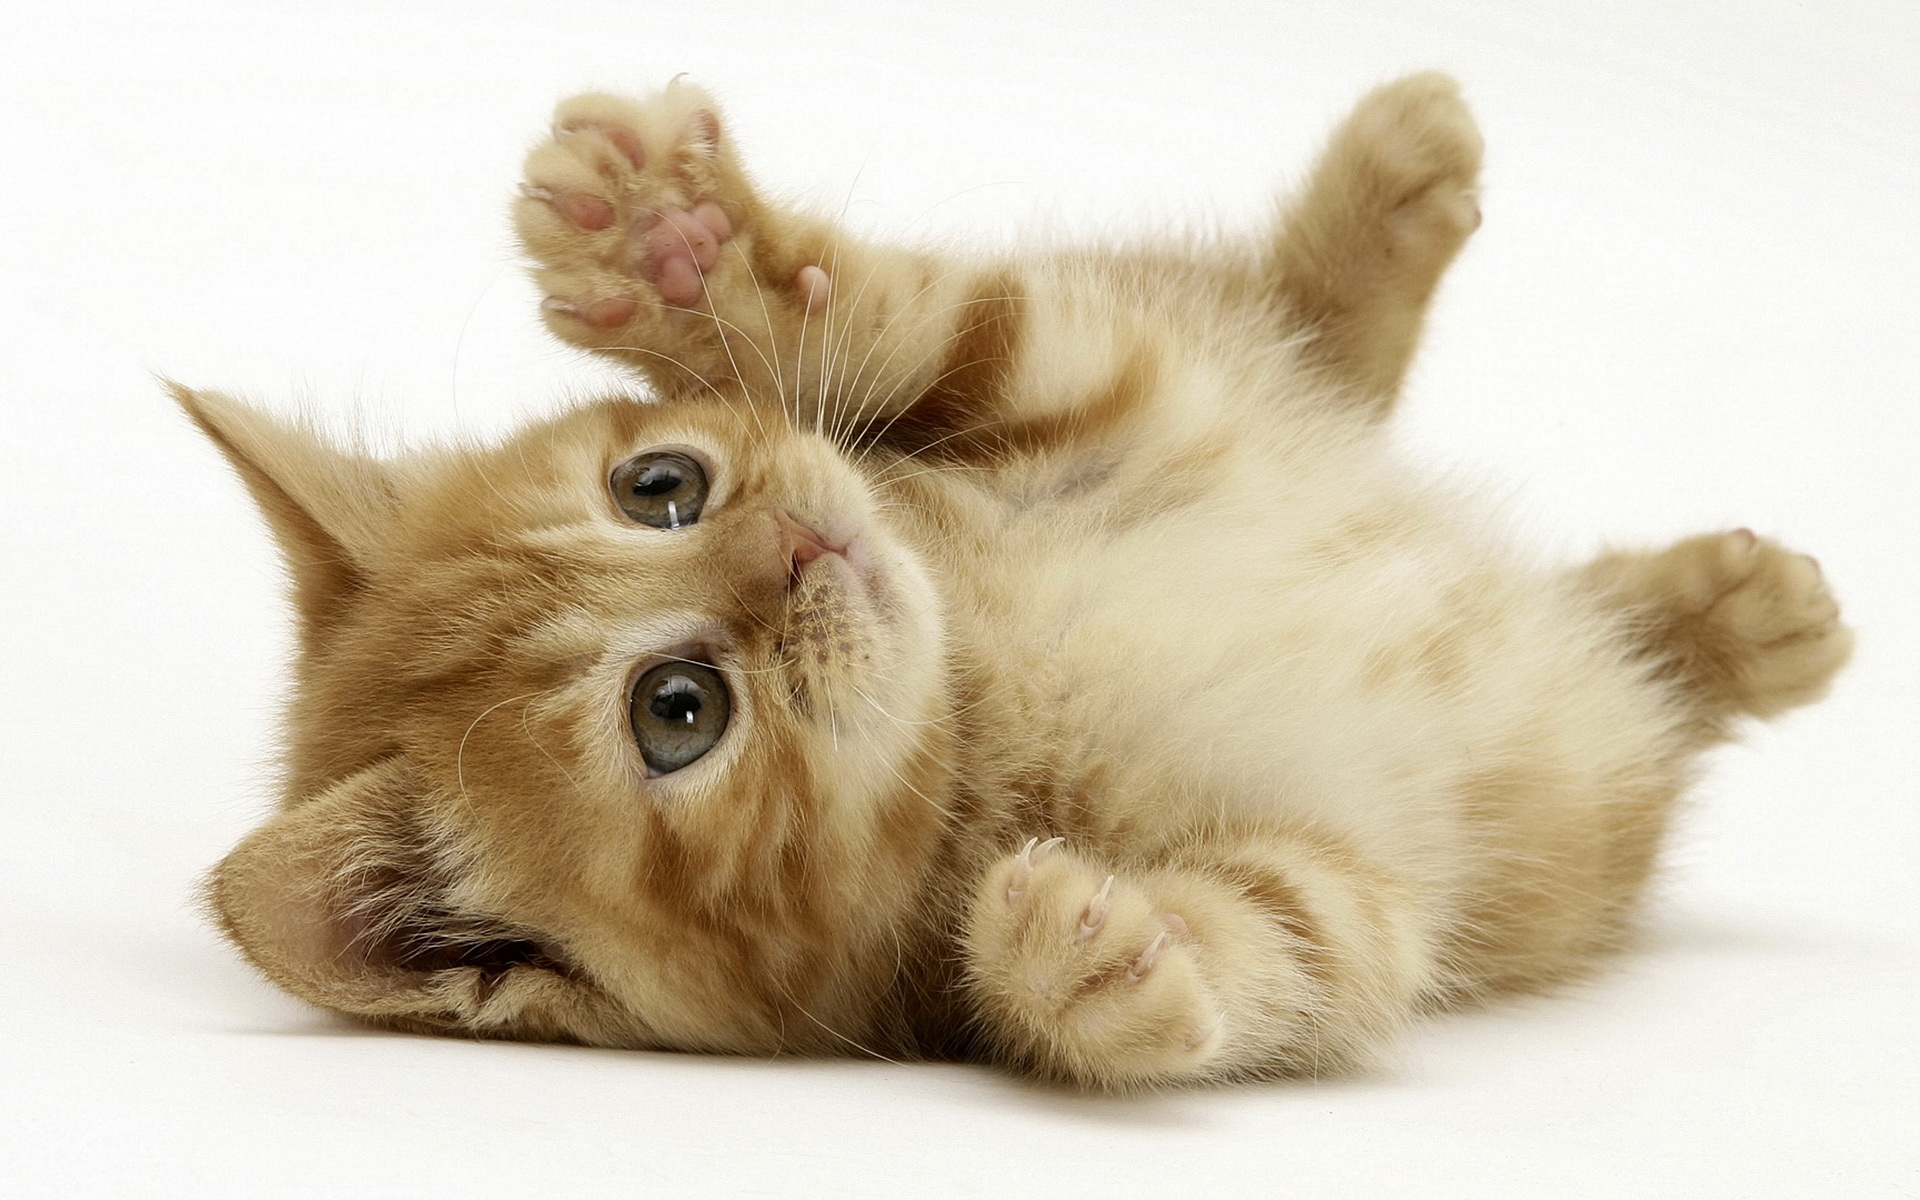 Little kitten wallpapers and images - wallpapers, pictures, photos